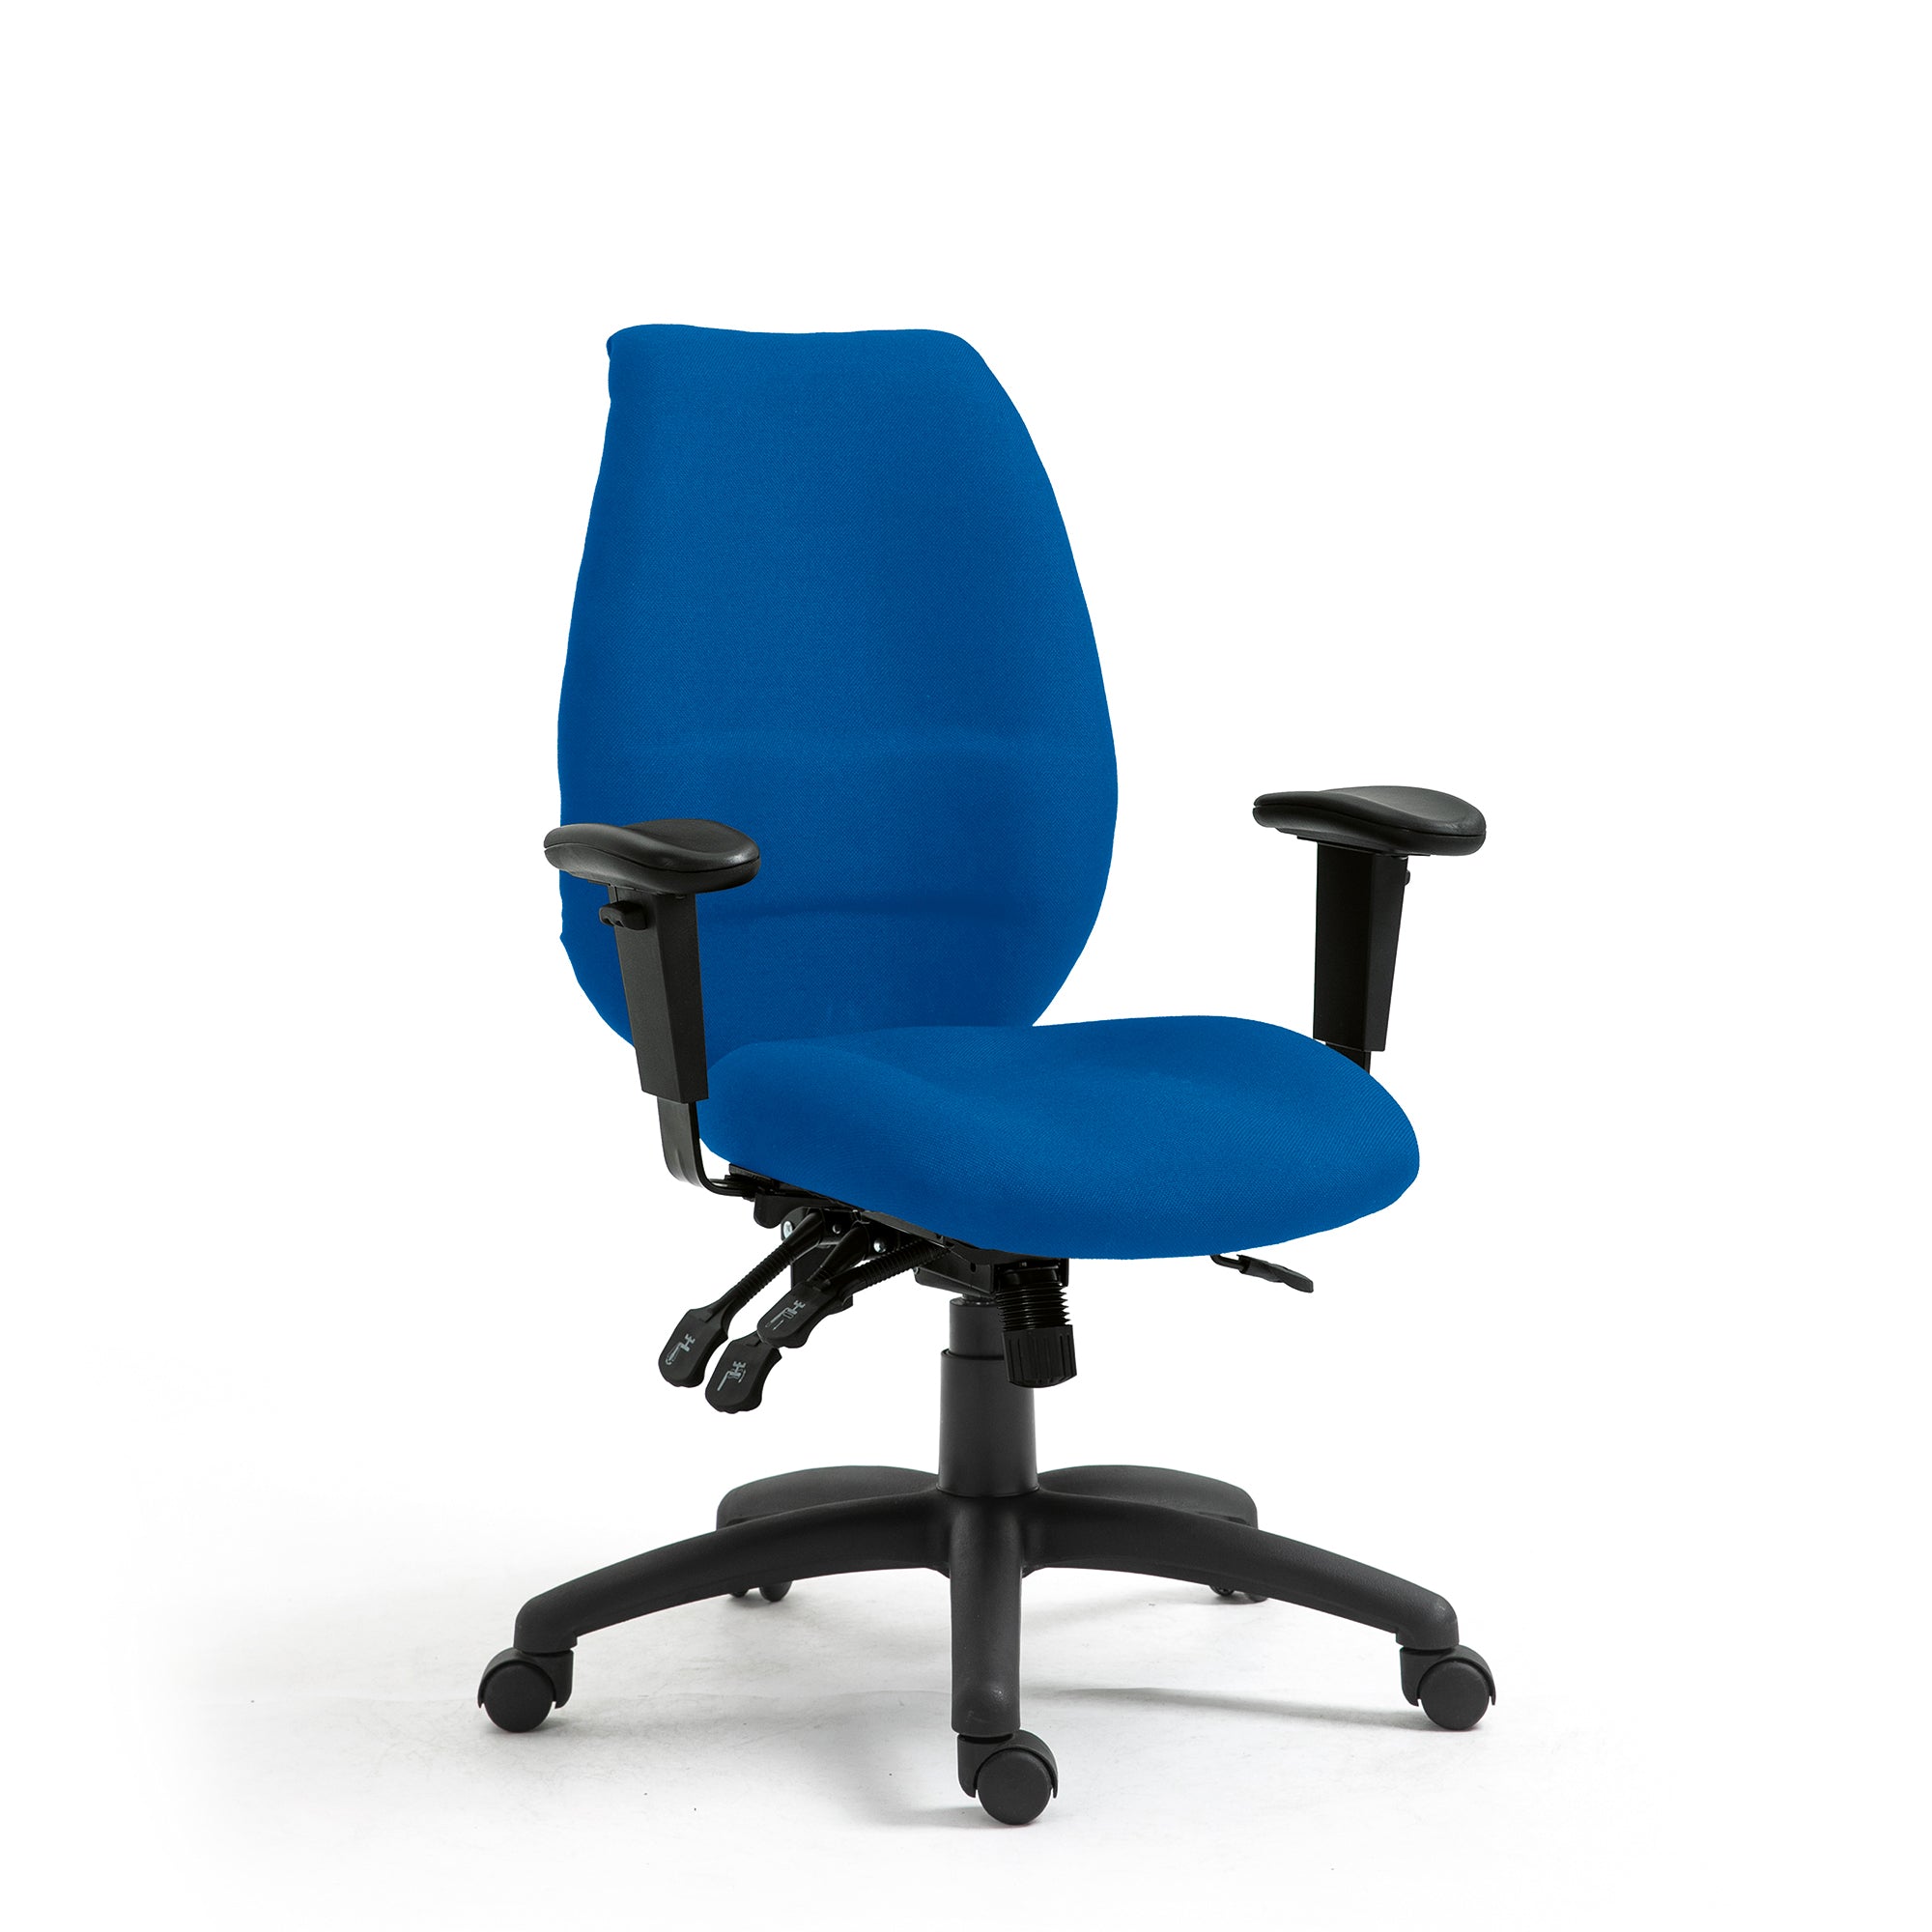 Thames – Ergonomic High Back 24 Hour Multi-Functional Synchronous Operator Chair with Multi-Adjustable Arms